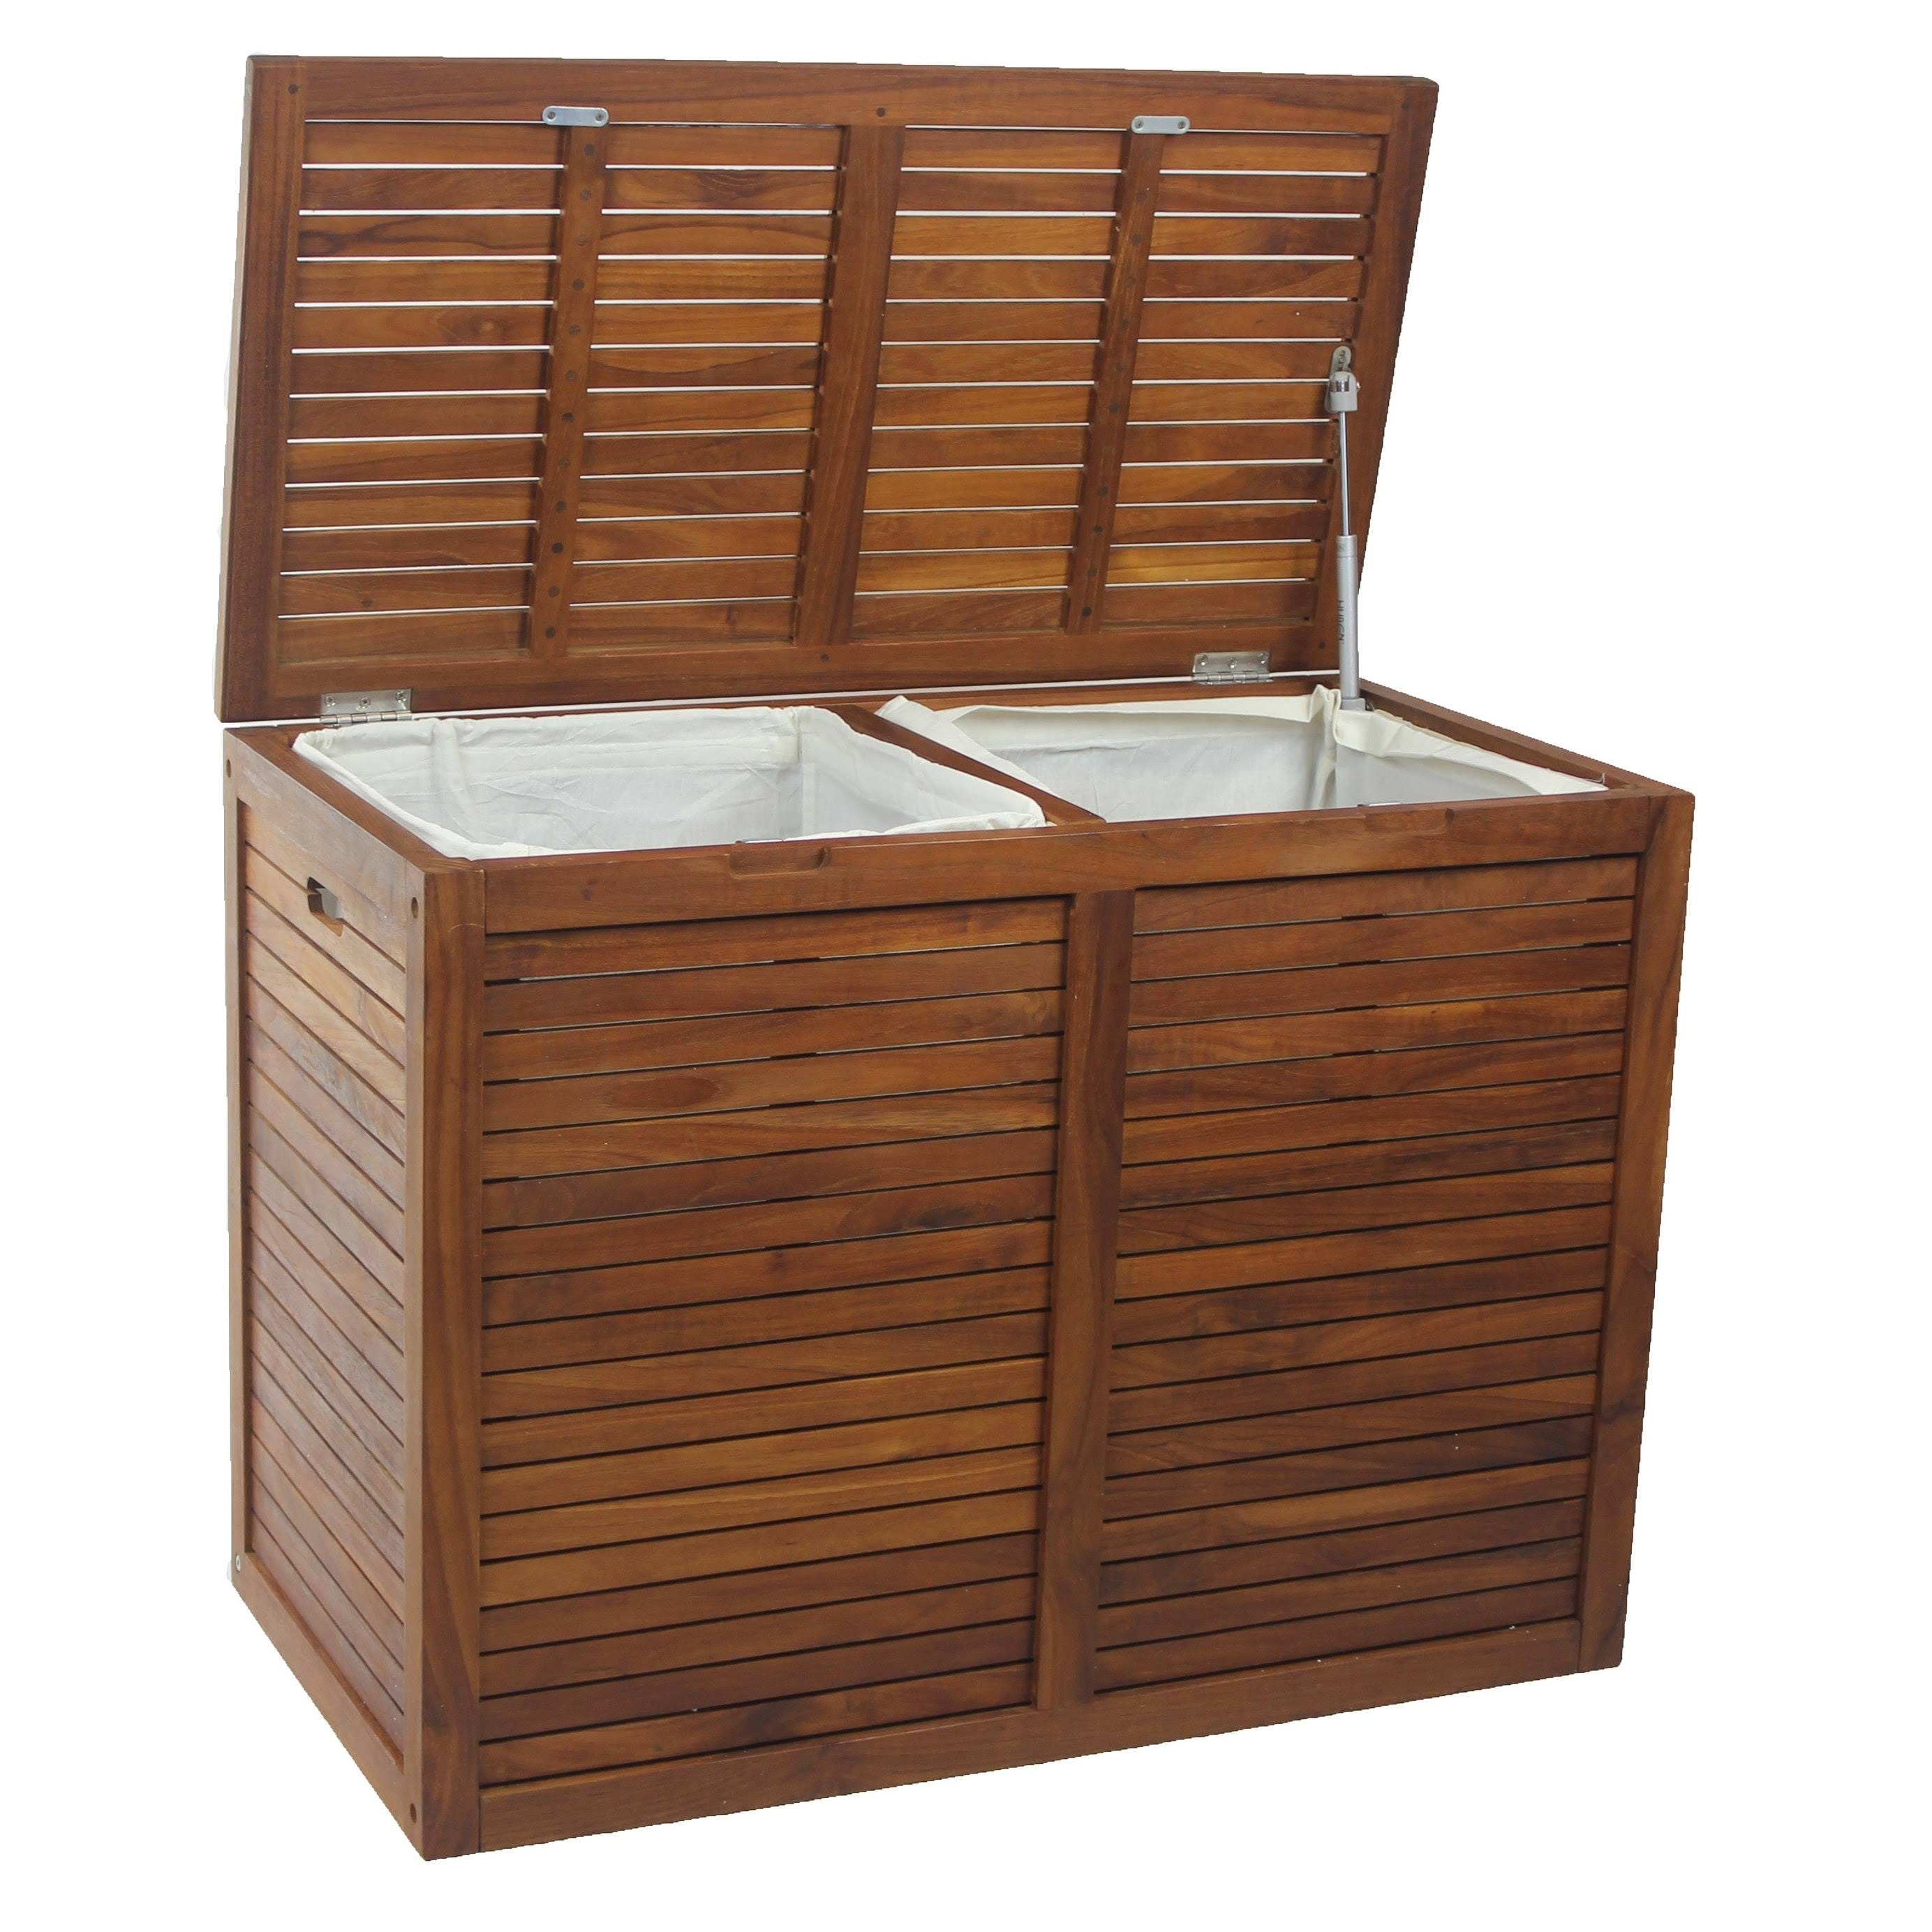 Double Laundry Hamper with Sustainable Teak Construction and Bench Feature | Image